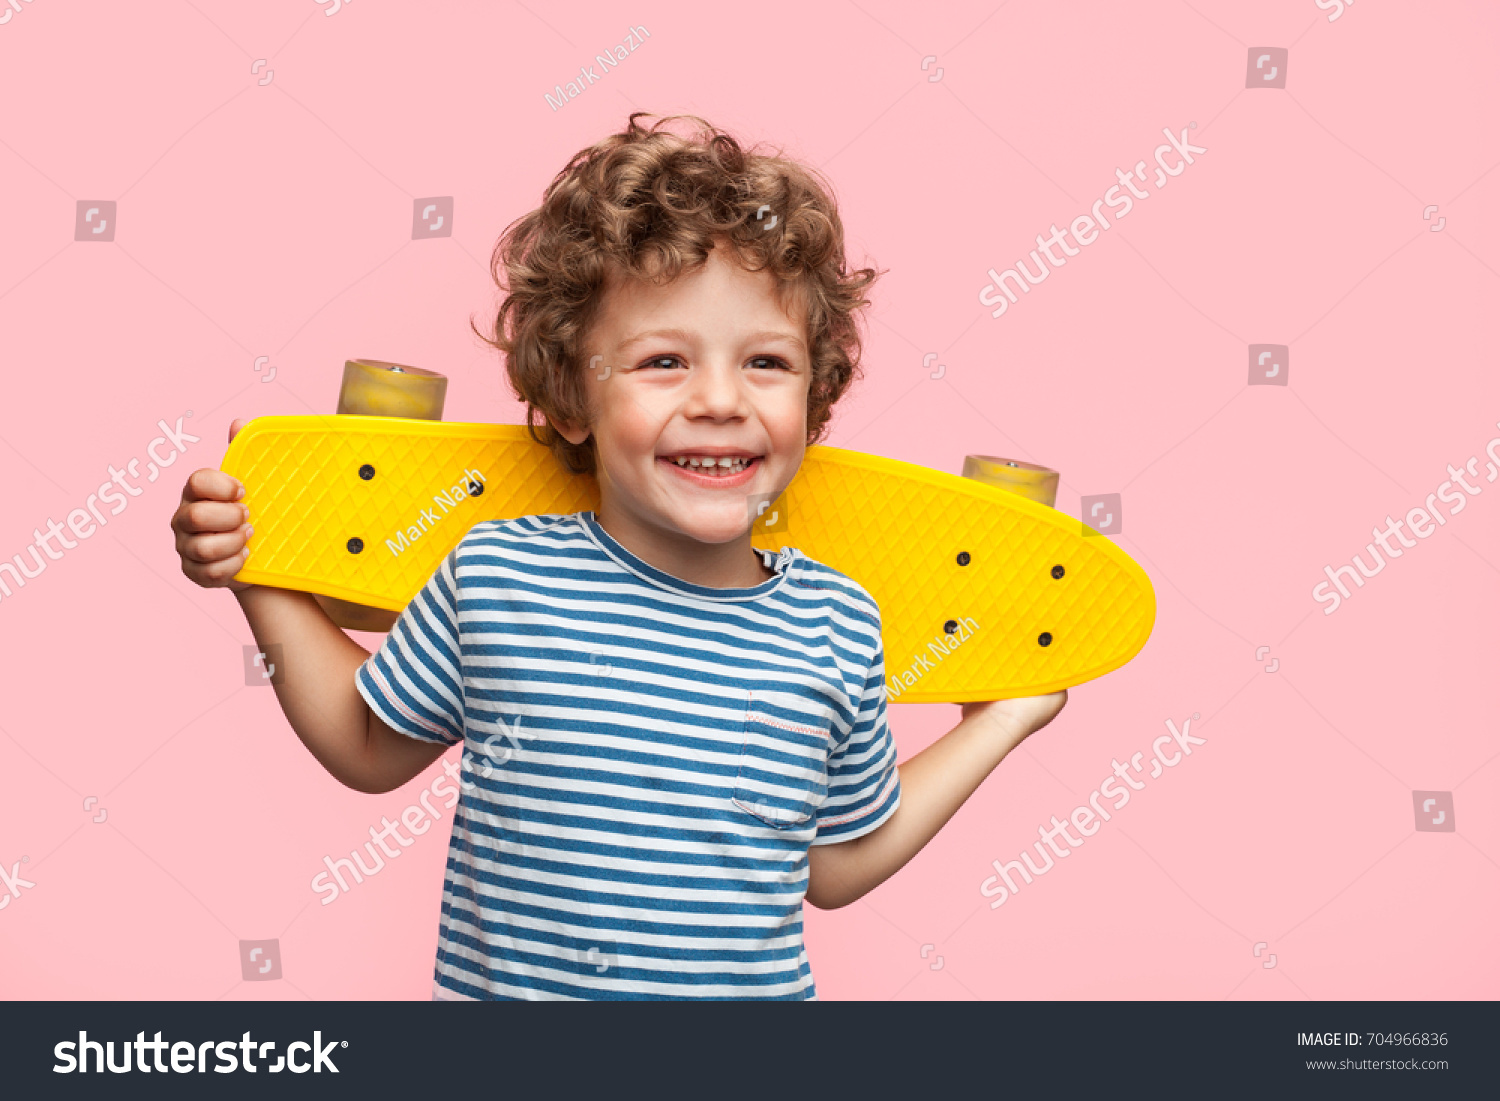 Little curly boy holding yellow longboard and looking away on pink background.  #704966836